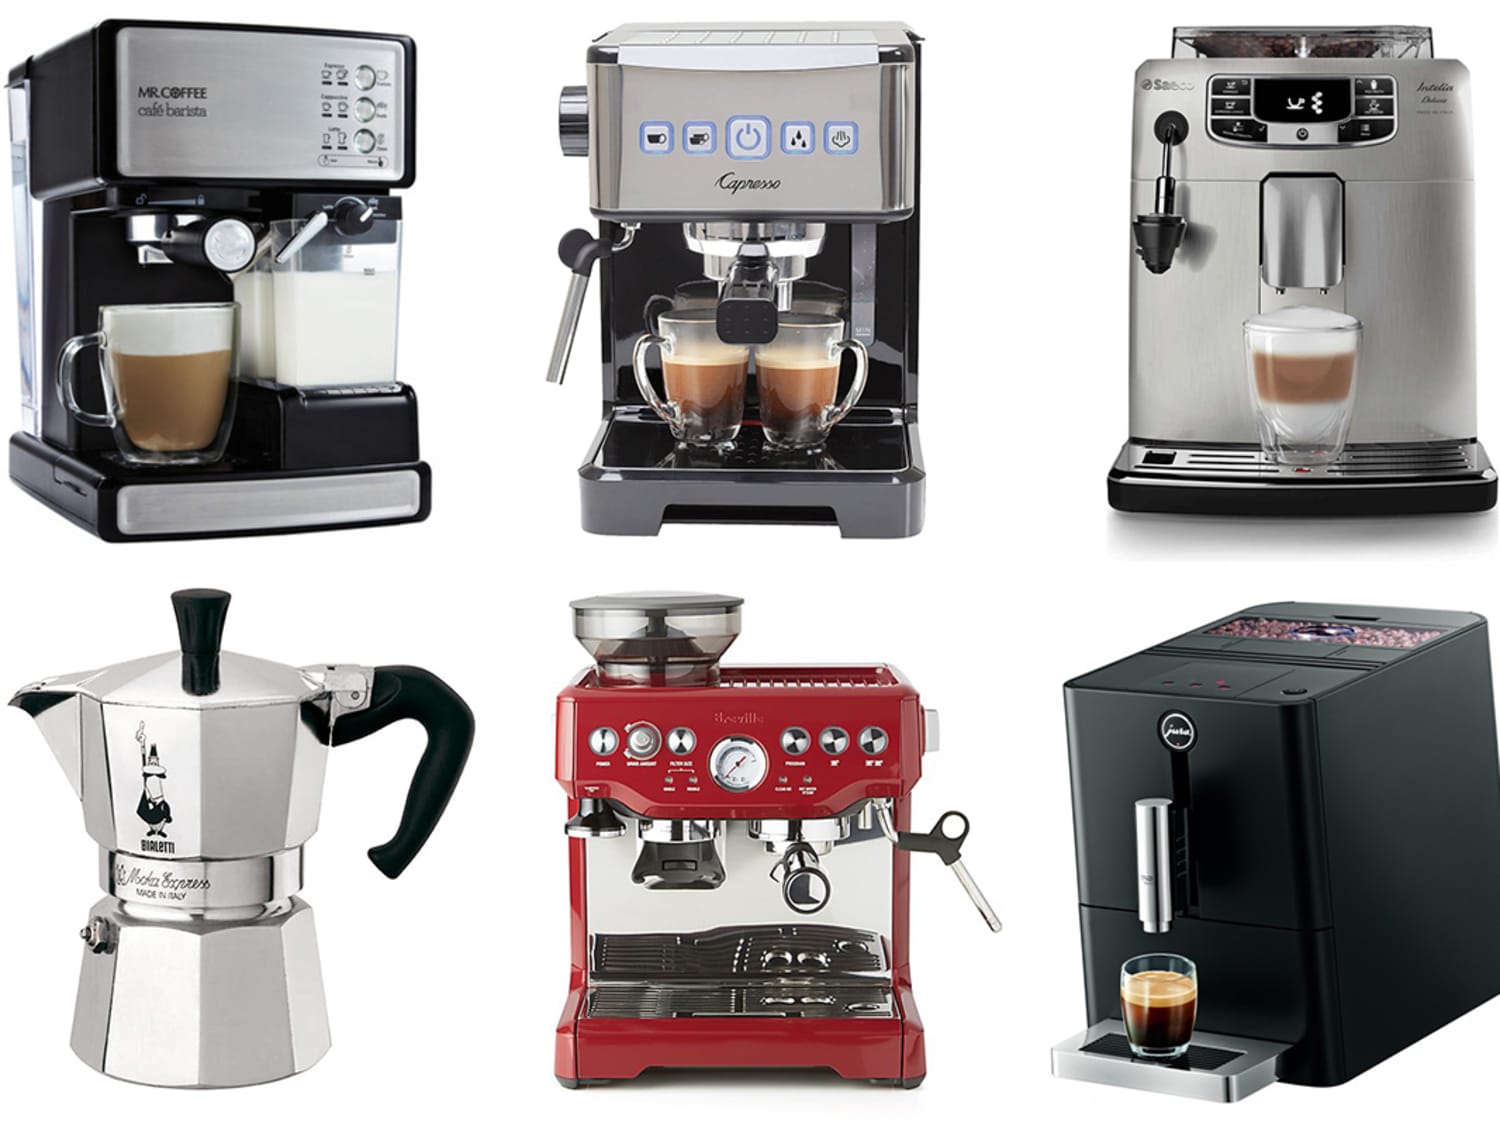 Capresso Adds a White Burr Grinder, Frother - HomePage News